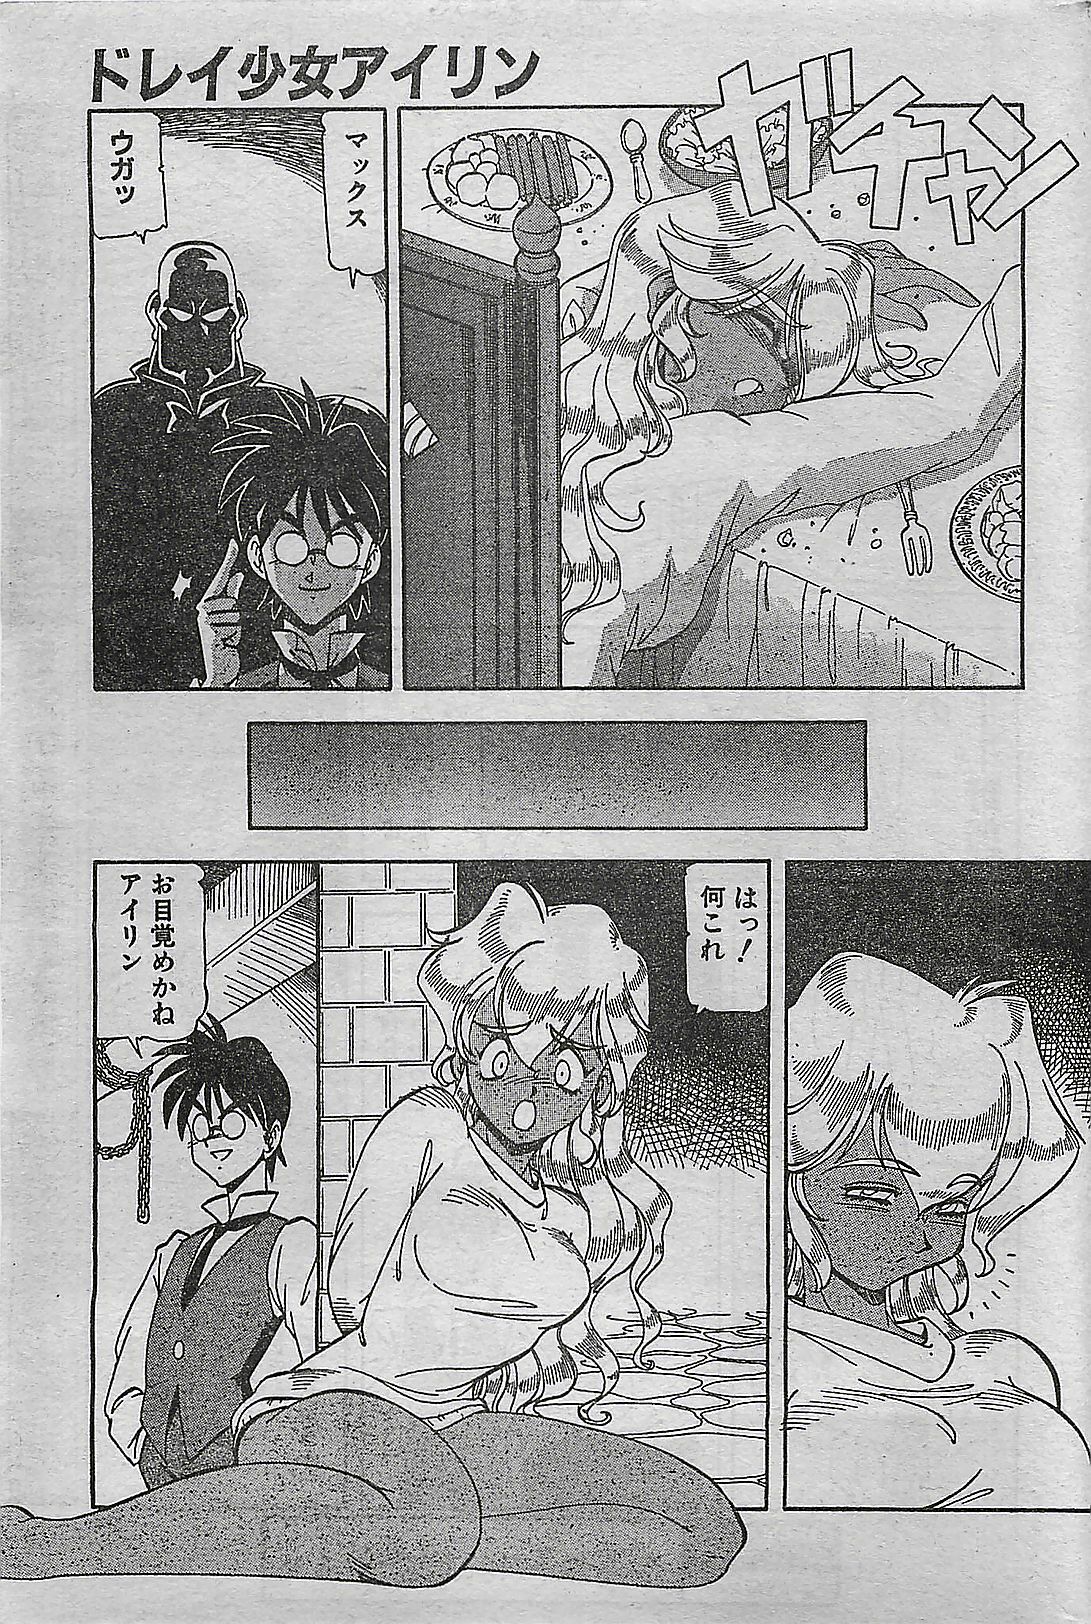 COMIC DRY-UP No.4 1995-02 page 53 full